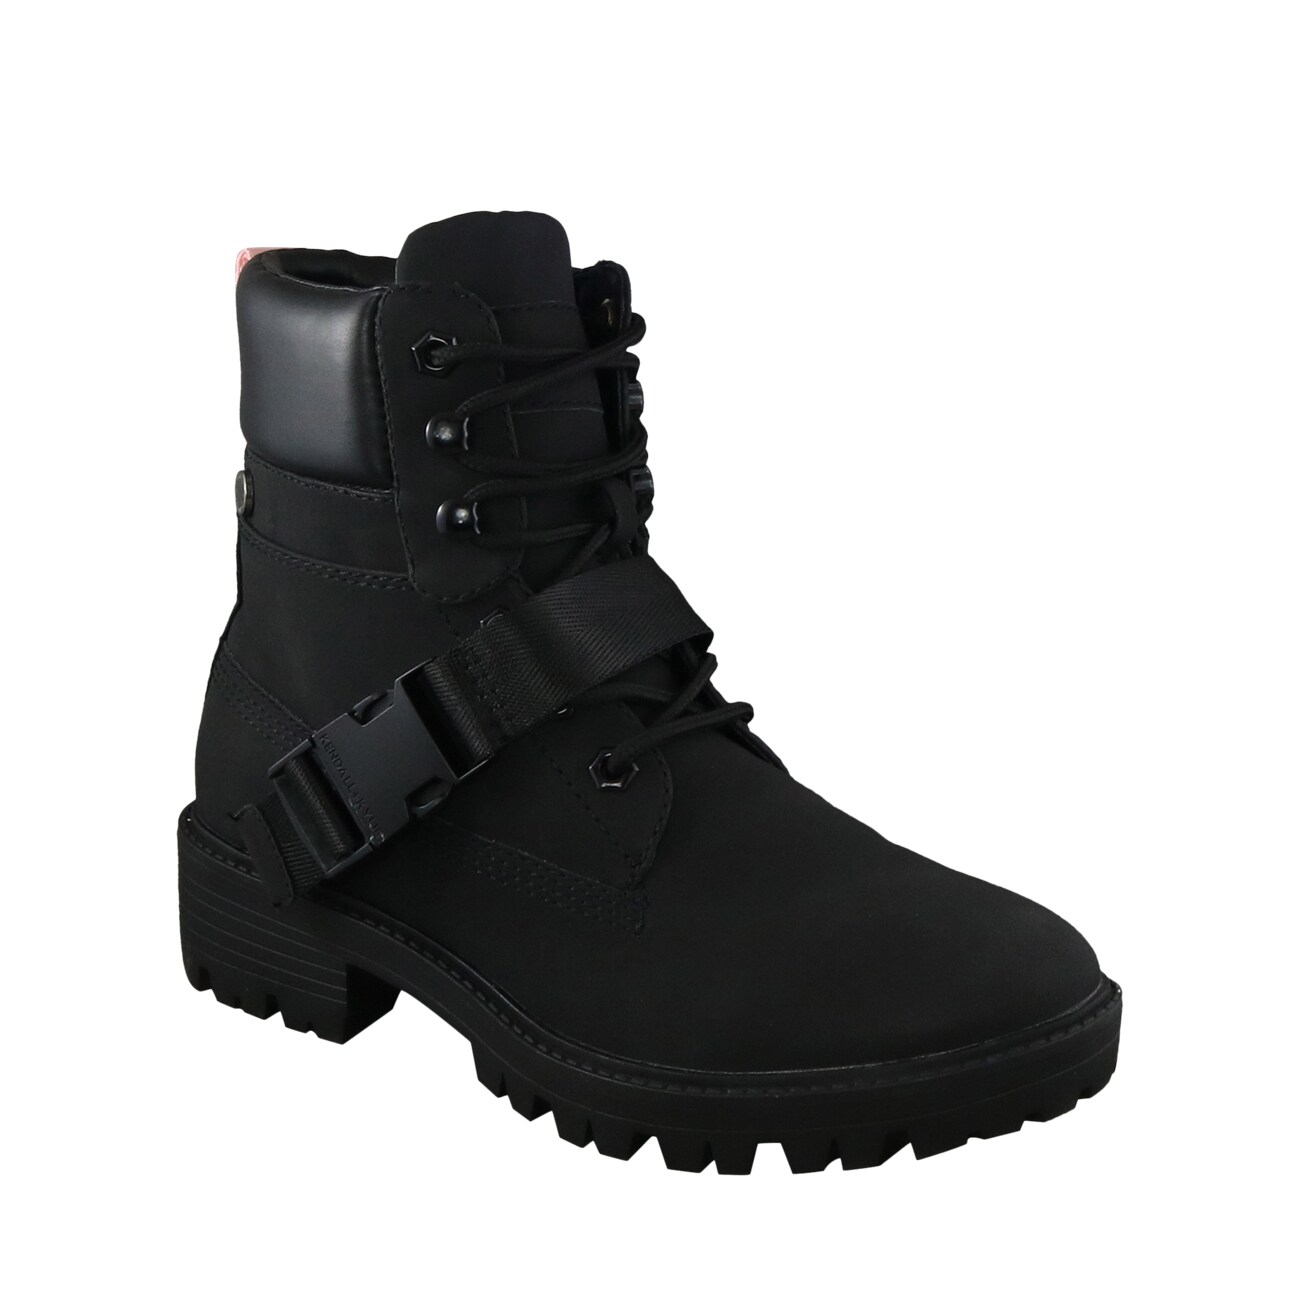 Kendall & Kylie EOS Boot | DSW Canada